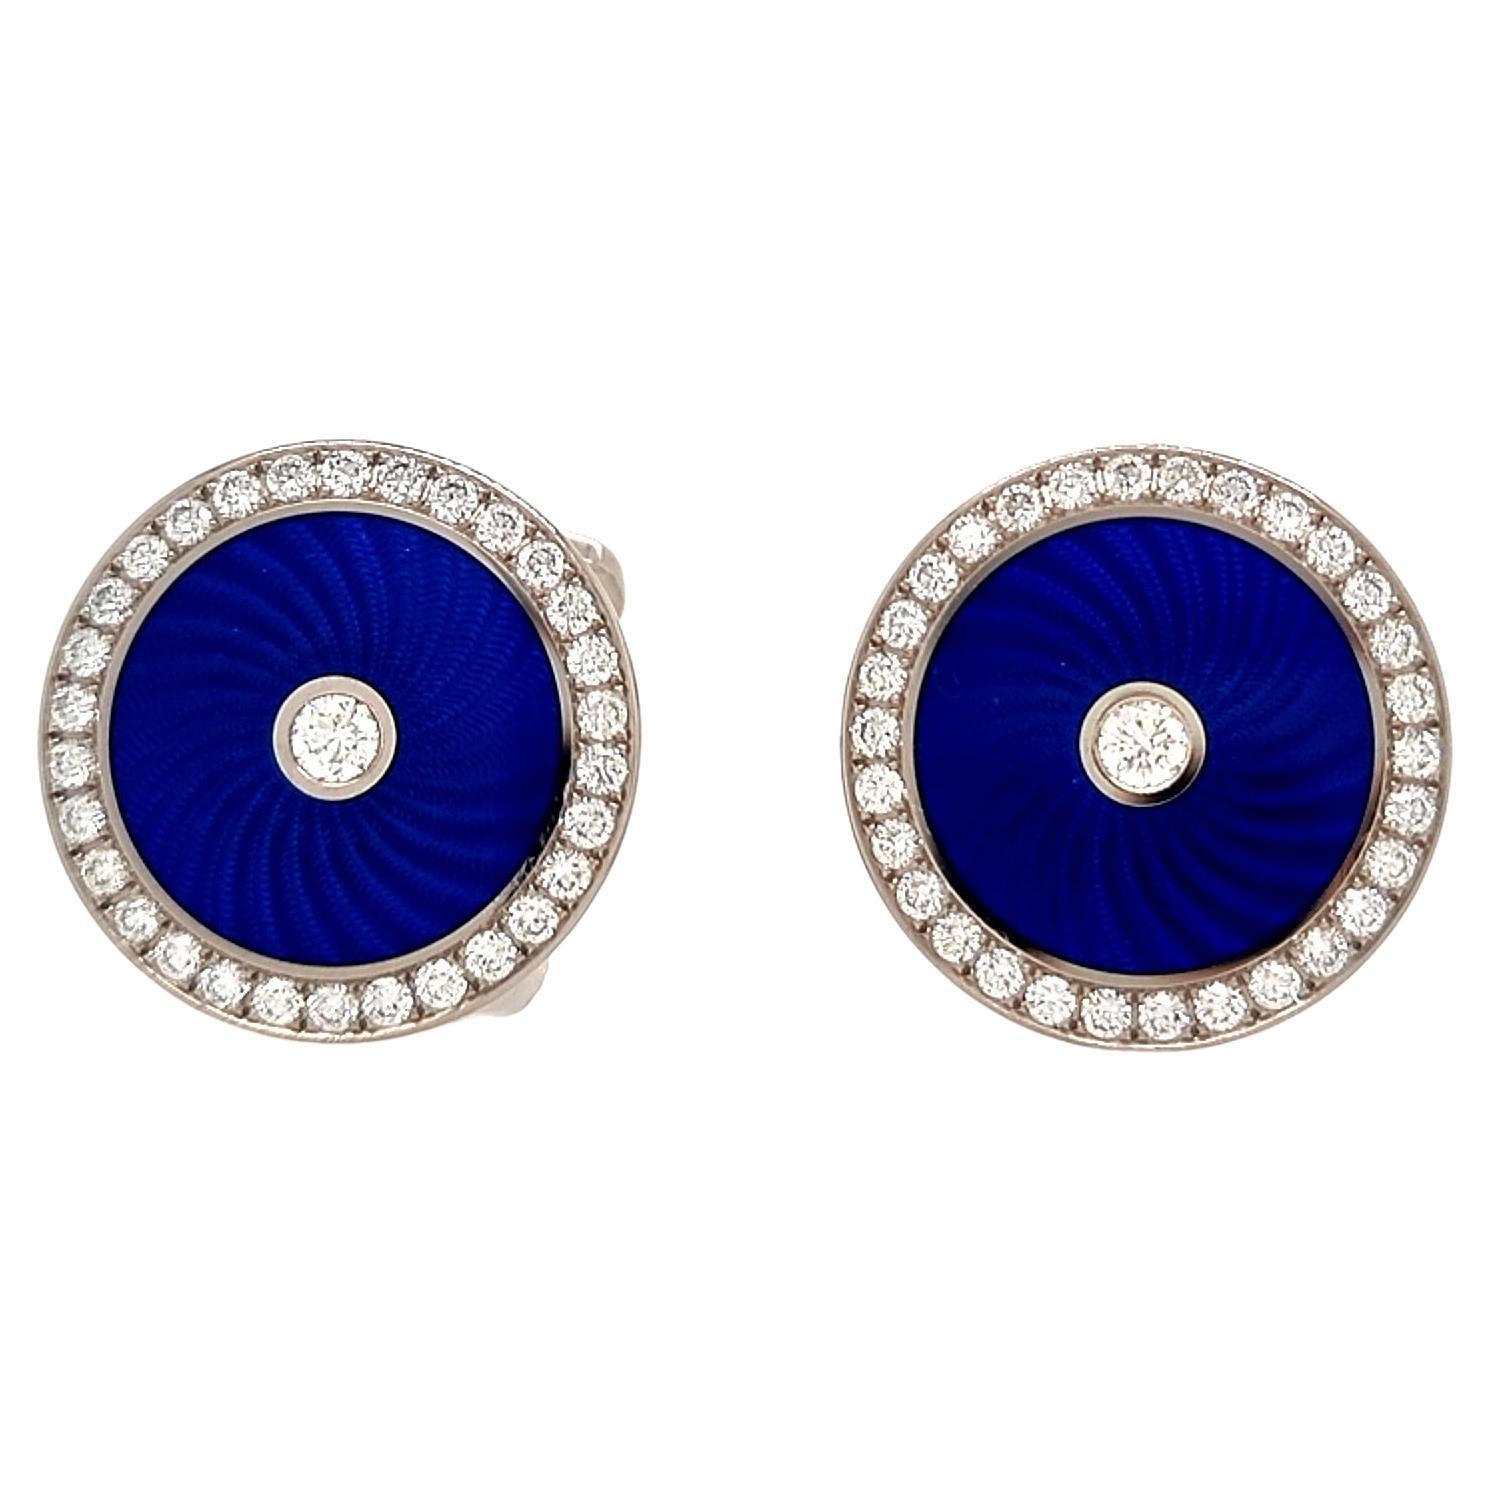 Victor Mayer Round Cufflinks, Globetrotter Collection, 18k White Gold, Electric Blue Vitreous Enamel, Guilloche, 62 Diamonds, total 1.40 ct, G VS

About the creator Victor Mayer
Victor Mayer is internationally renowned for elegant timeless designs